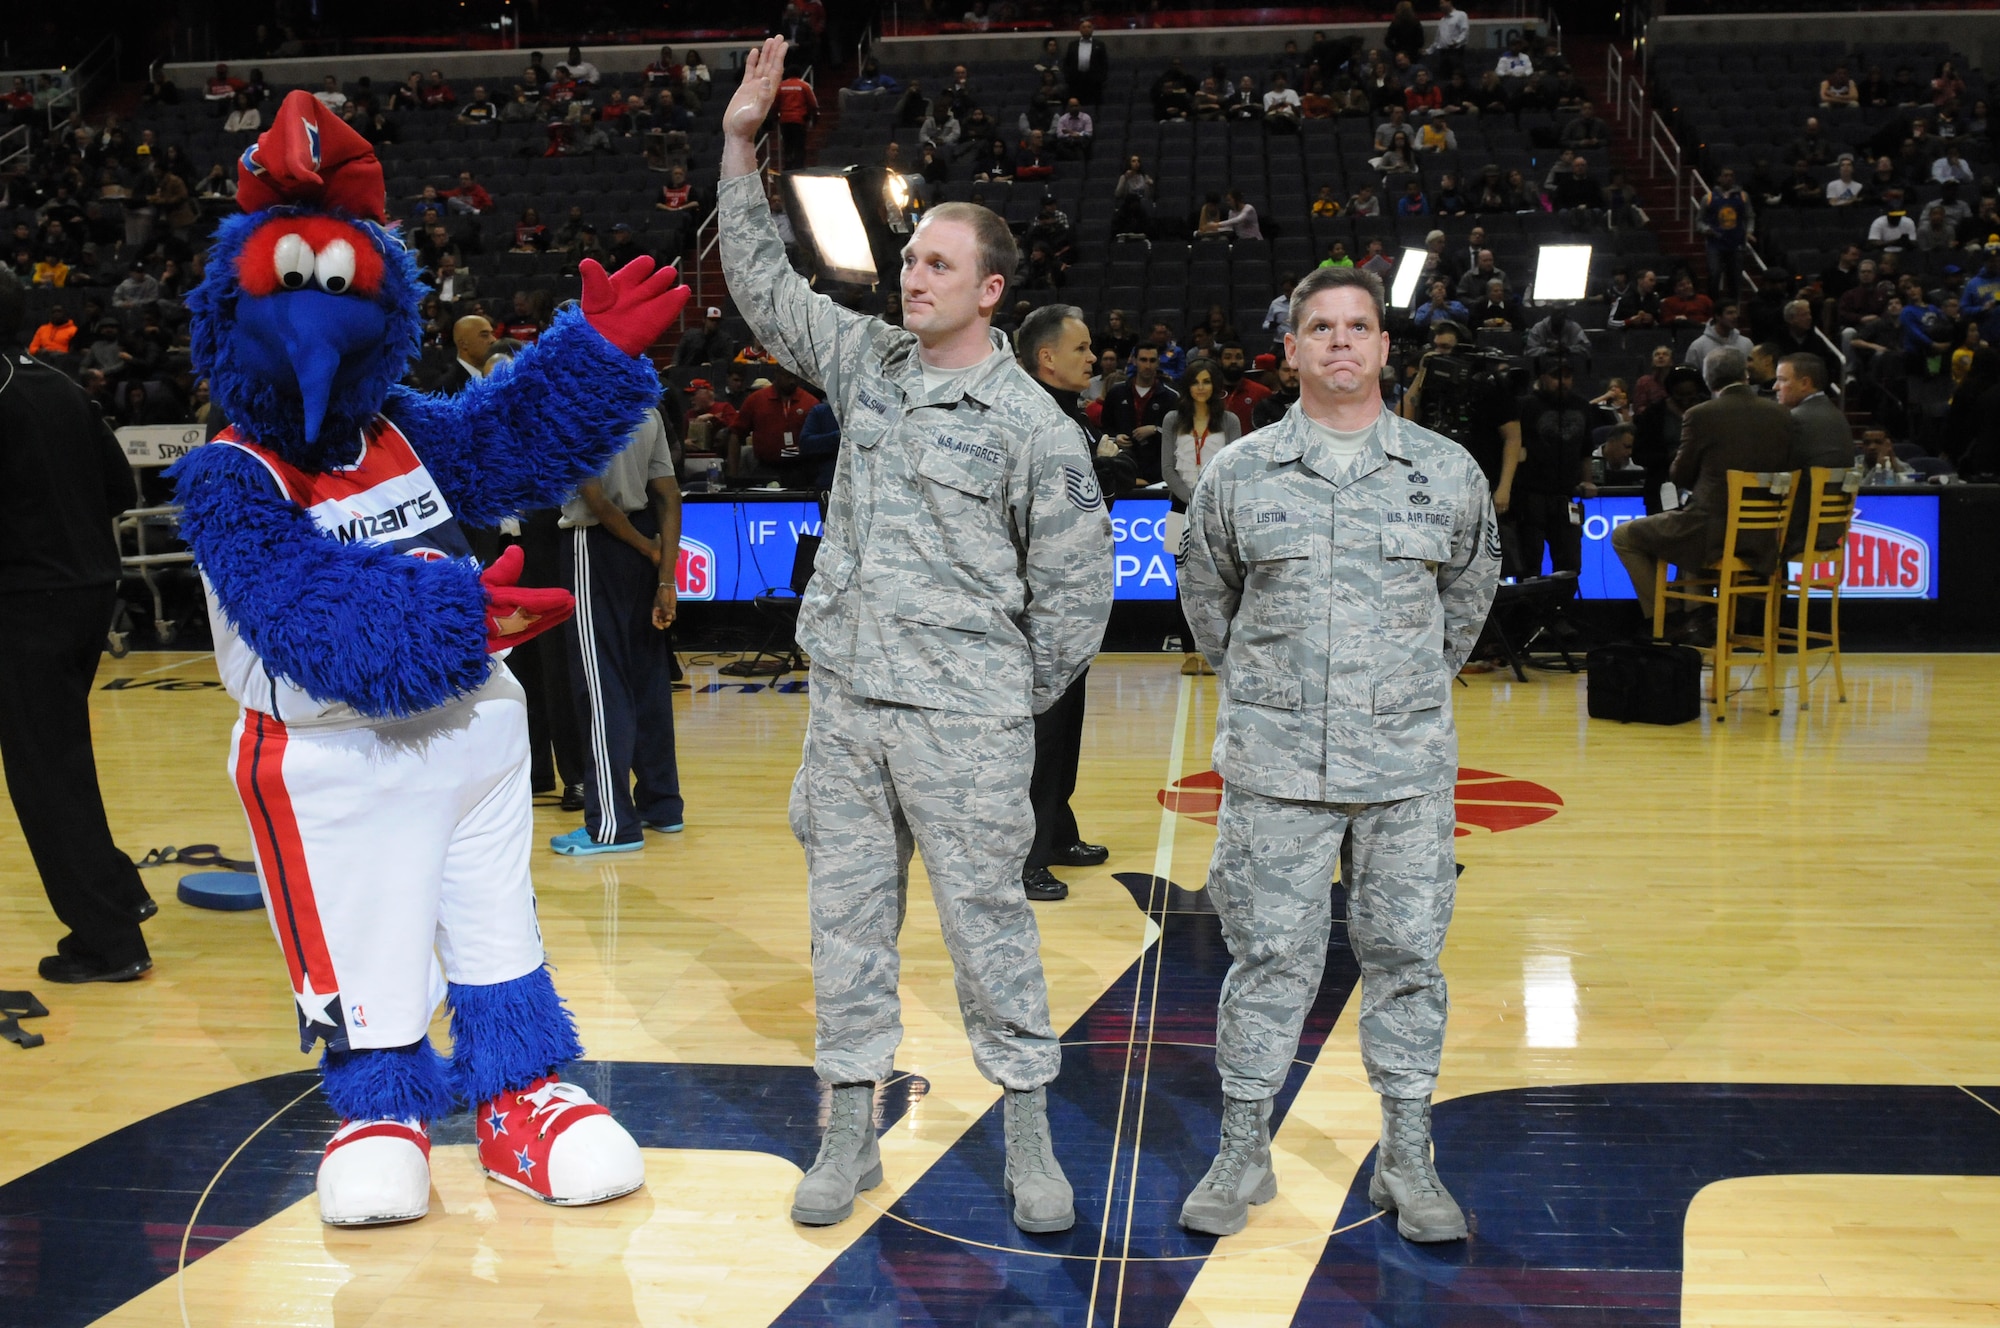 Tech. Sgt. Justin Foulsham waves to the crowd as he and fellow D.C. Air National Guard member Senior Master Sgt. William Liston are honored for their service prior to the Washington Wizards home game against the Golden State Warriors, Feb. 24. Both Foulsham and Liston are 2014 DCANG annual award winners.  (Air National Guard photo by Master Sgt. Craig Clapper)